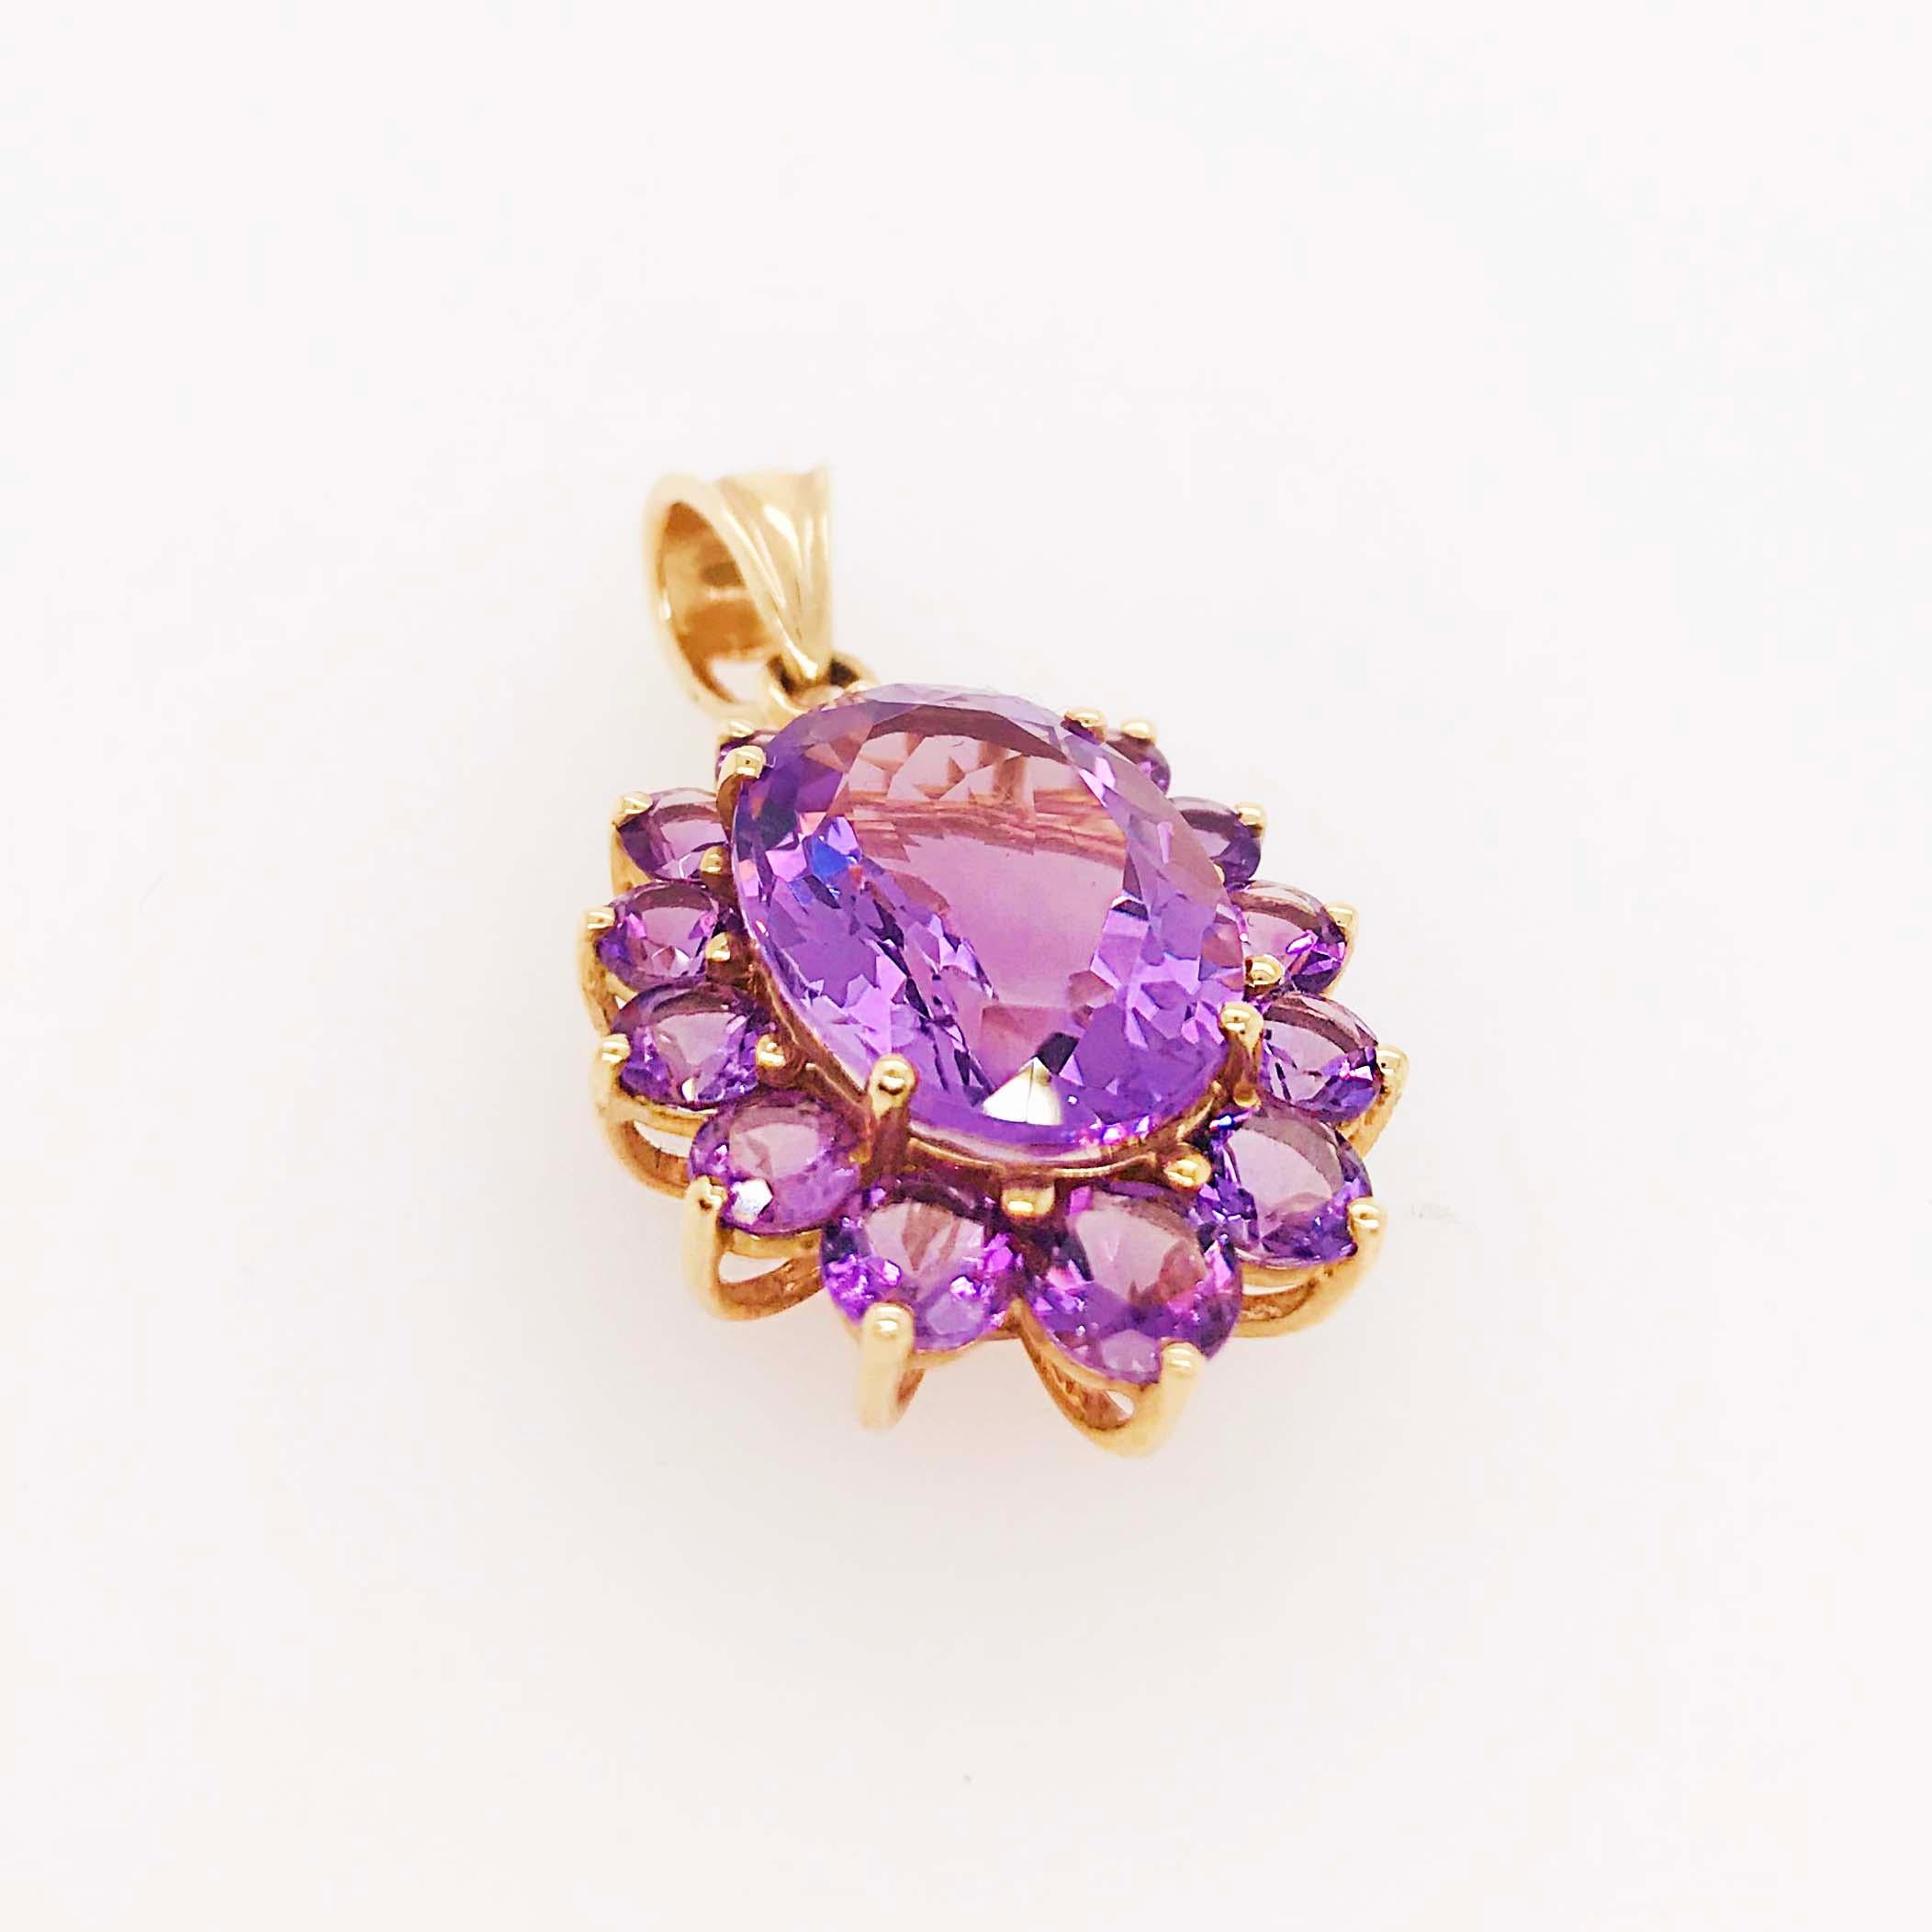 12 Carat Oval and Round Amethyst Custom Women's Power Pendant or Women’s Rights 2